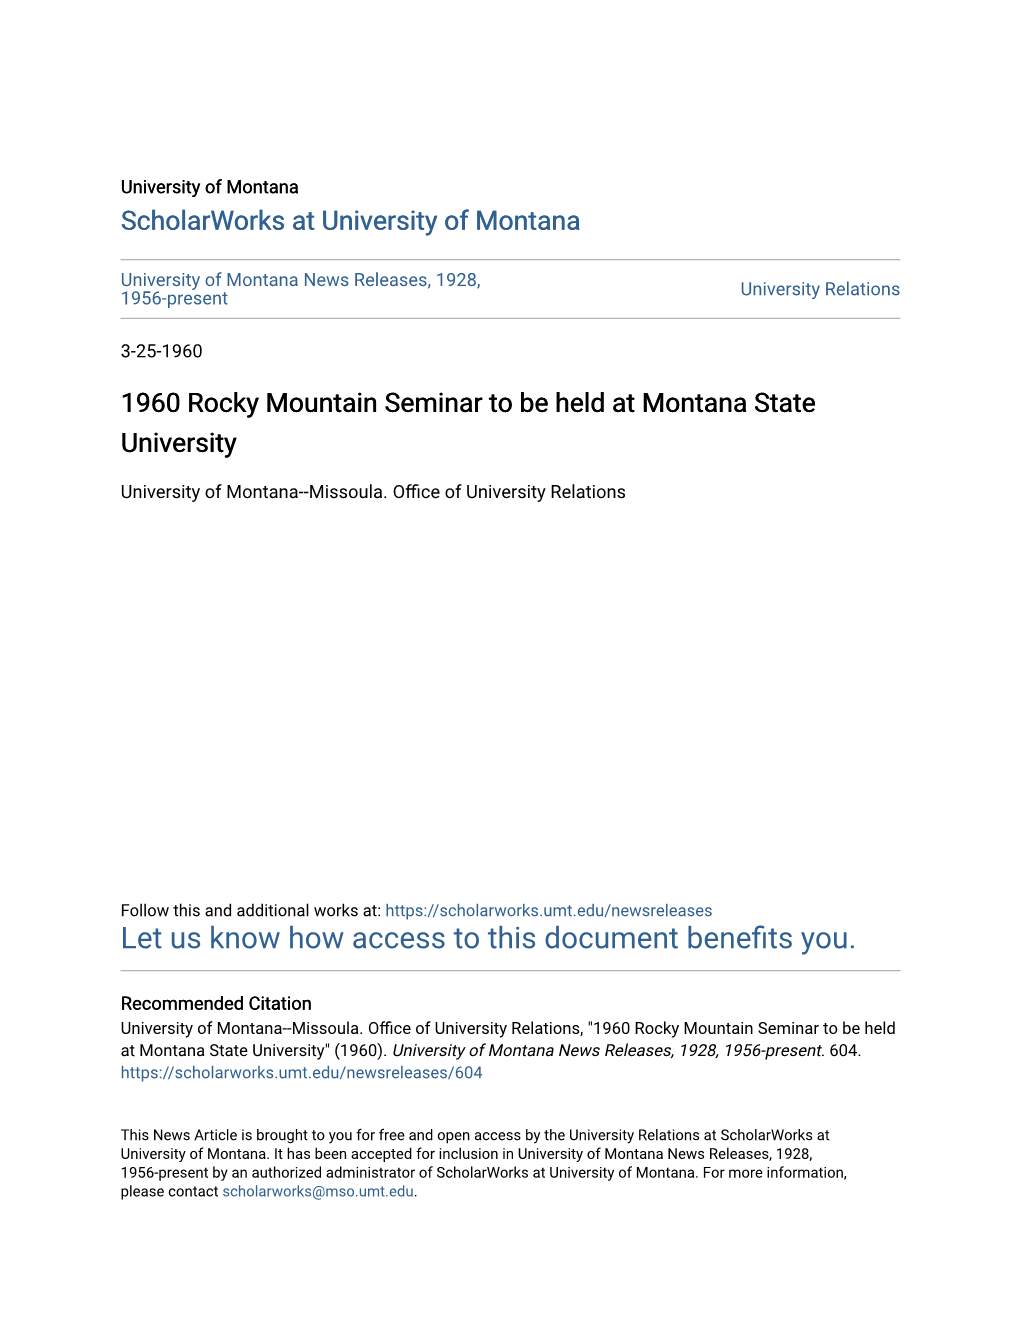 1960 Rocky Mountain Seminar to Be Held at Montana State University